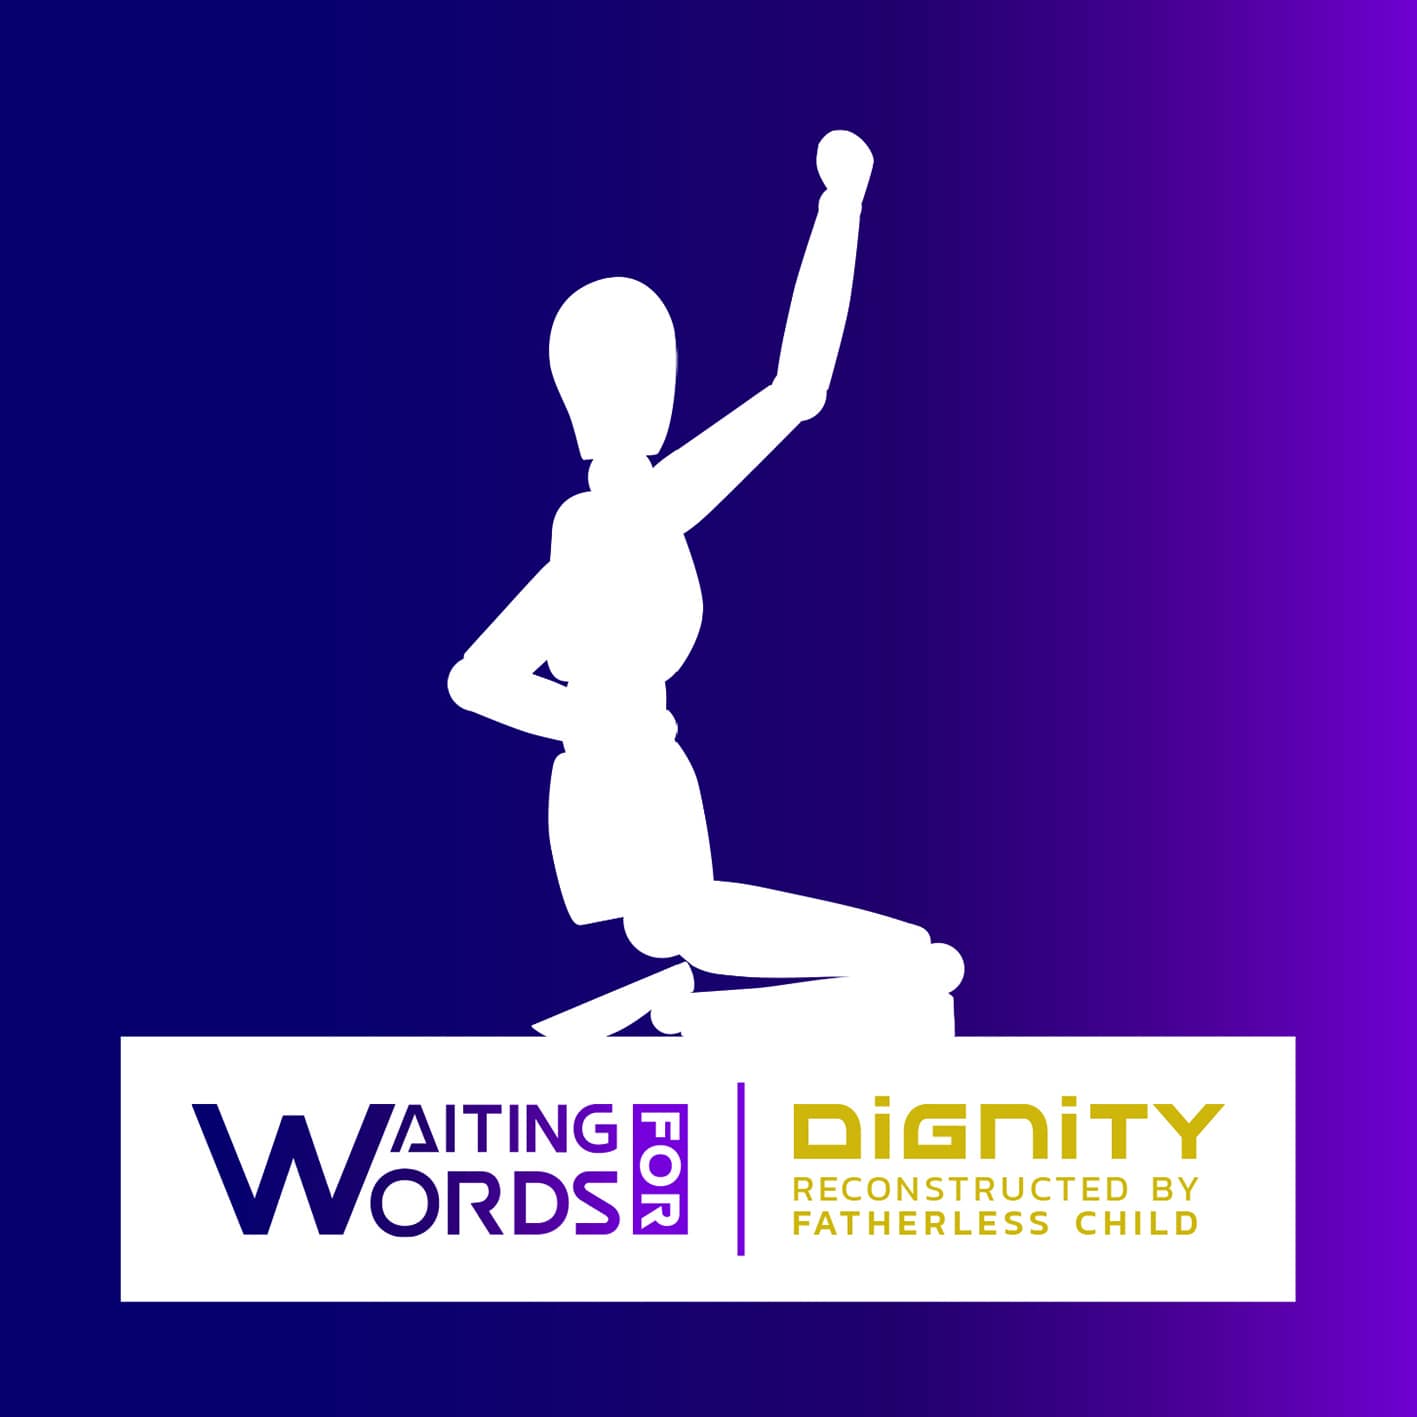 Waiting For Words - Dignity (Reconstructed by Fatheless Child